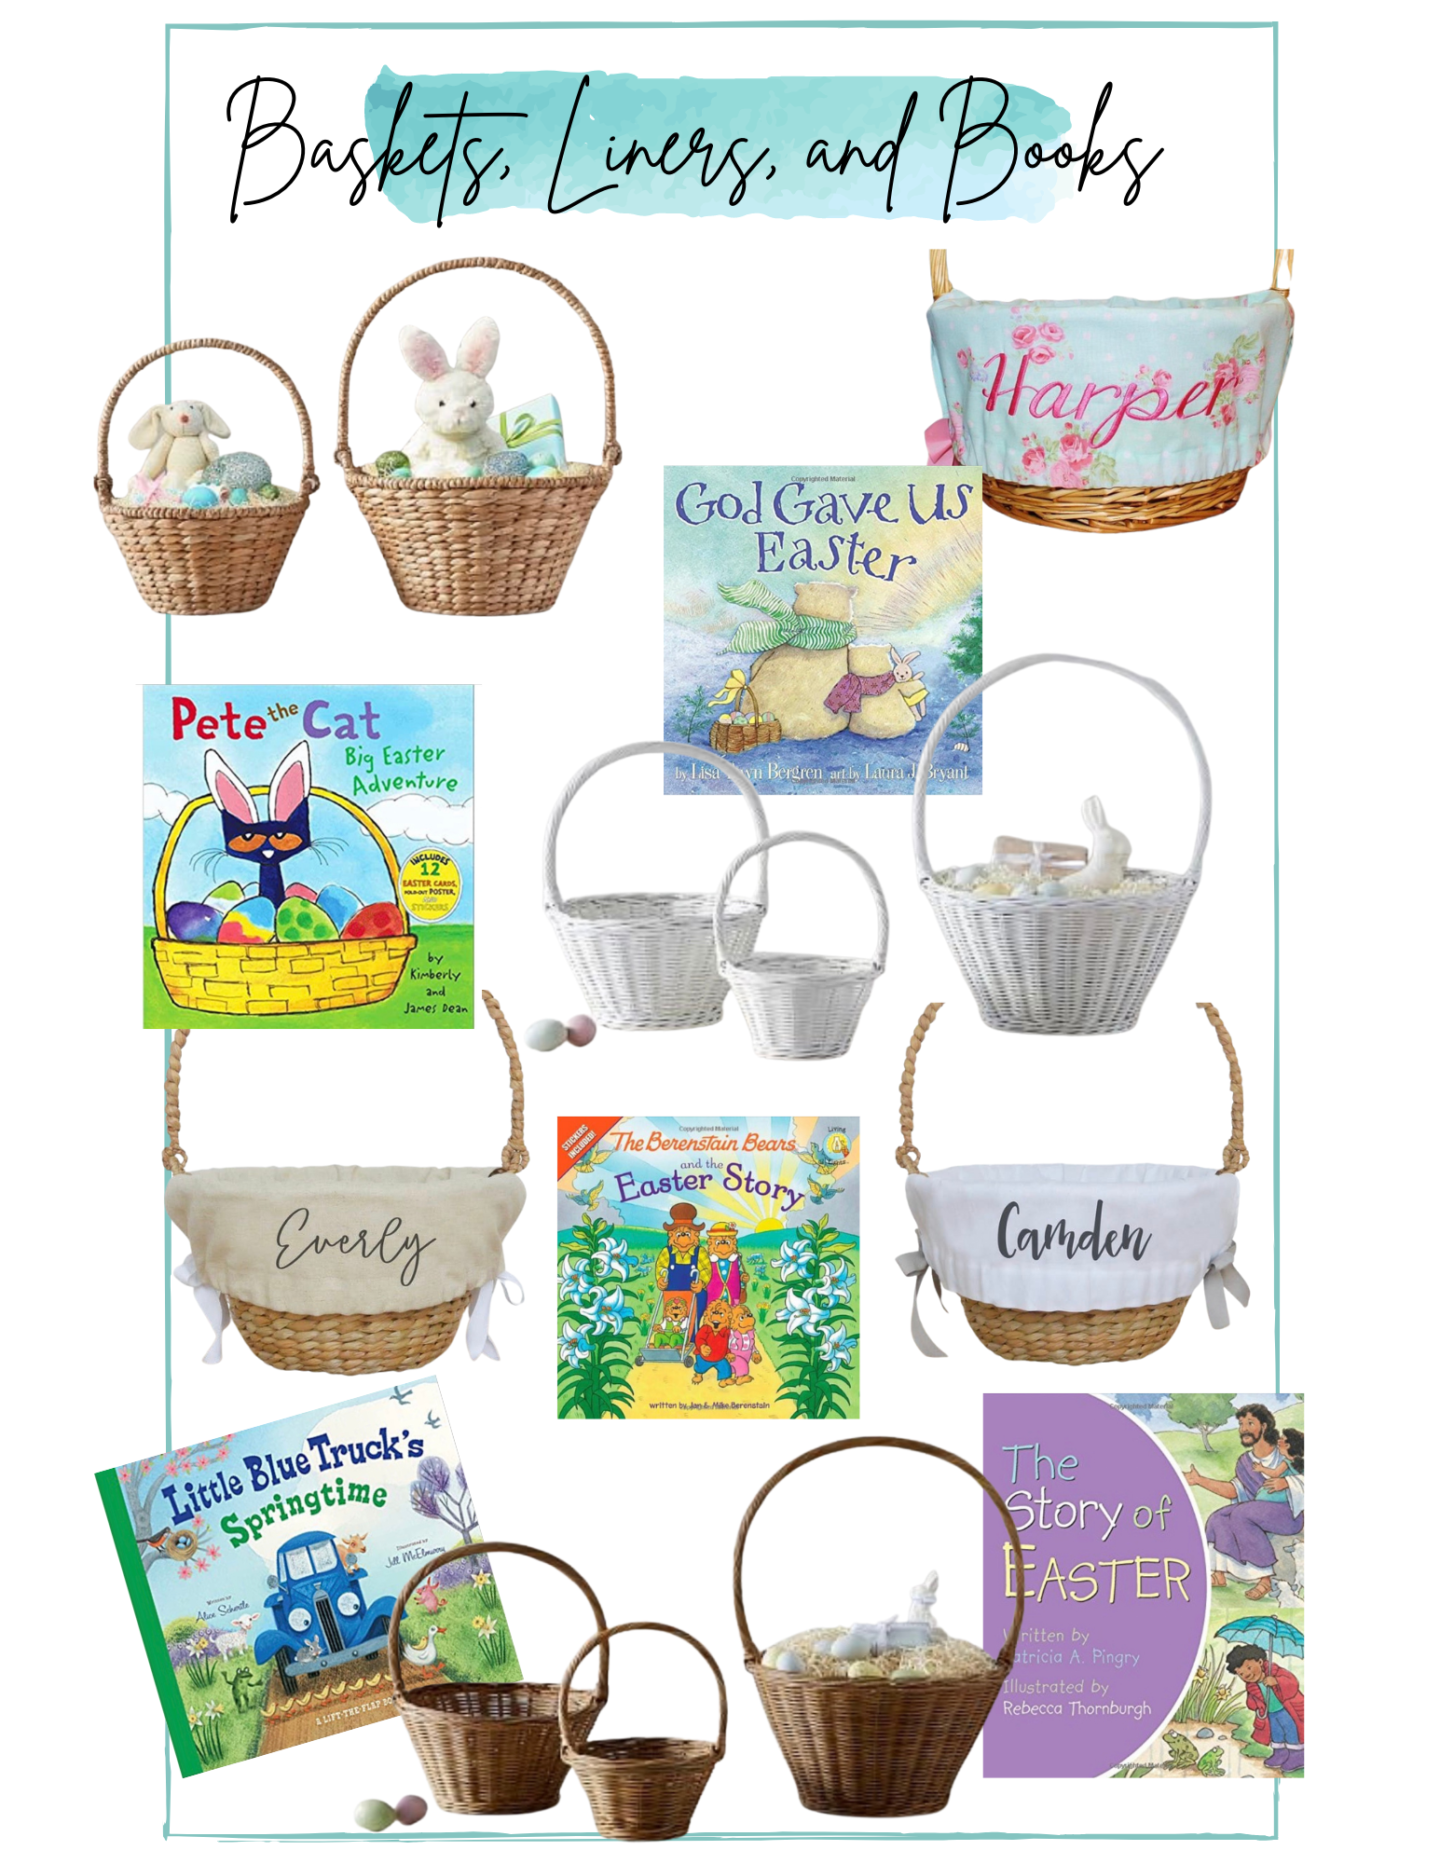 Easter Essentials 2021: Easter Baskets, Easter Basket Stuffers, and Easter Outfits